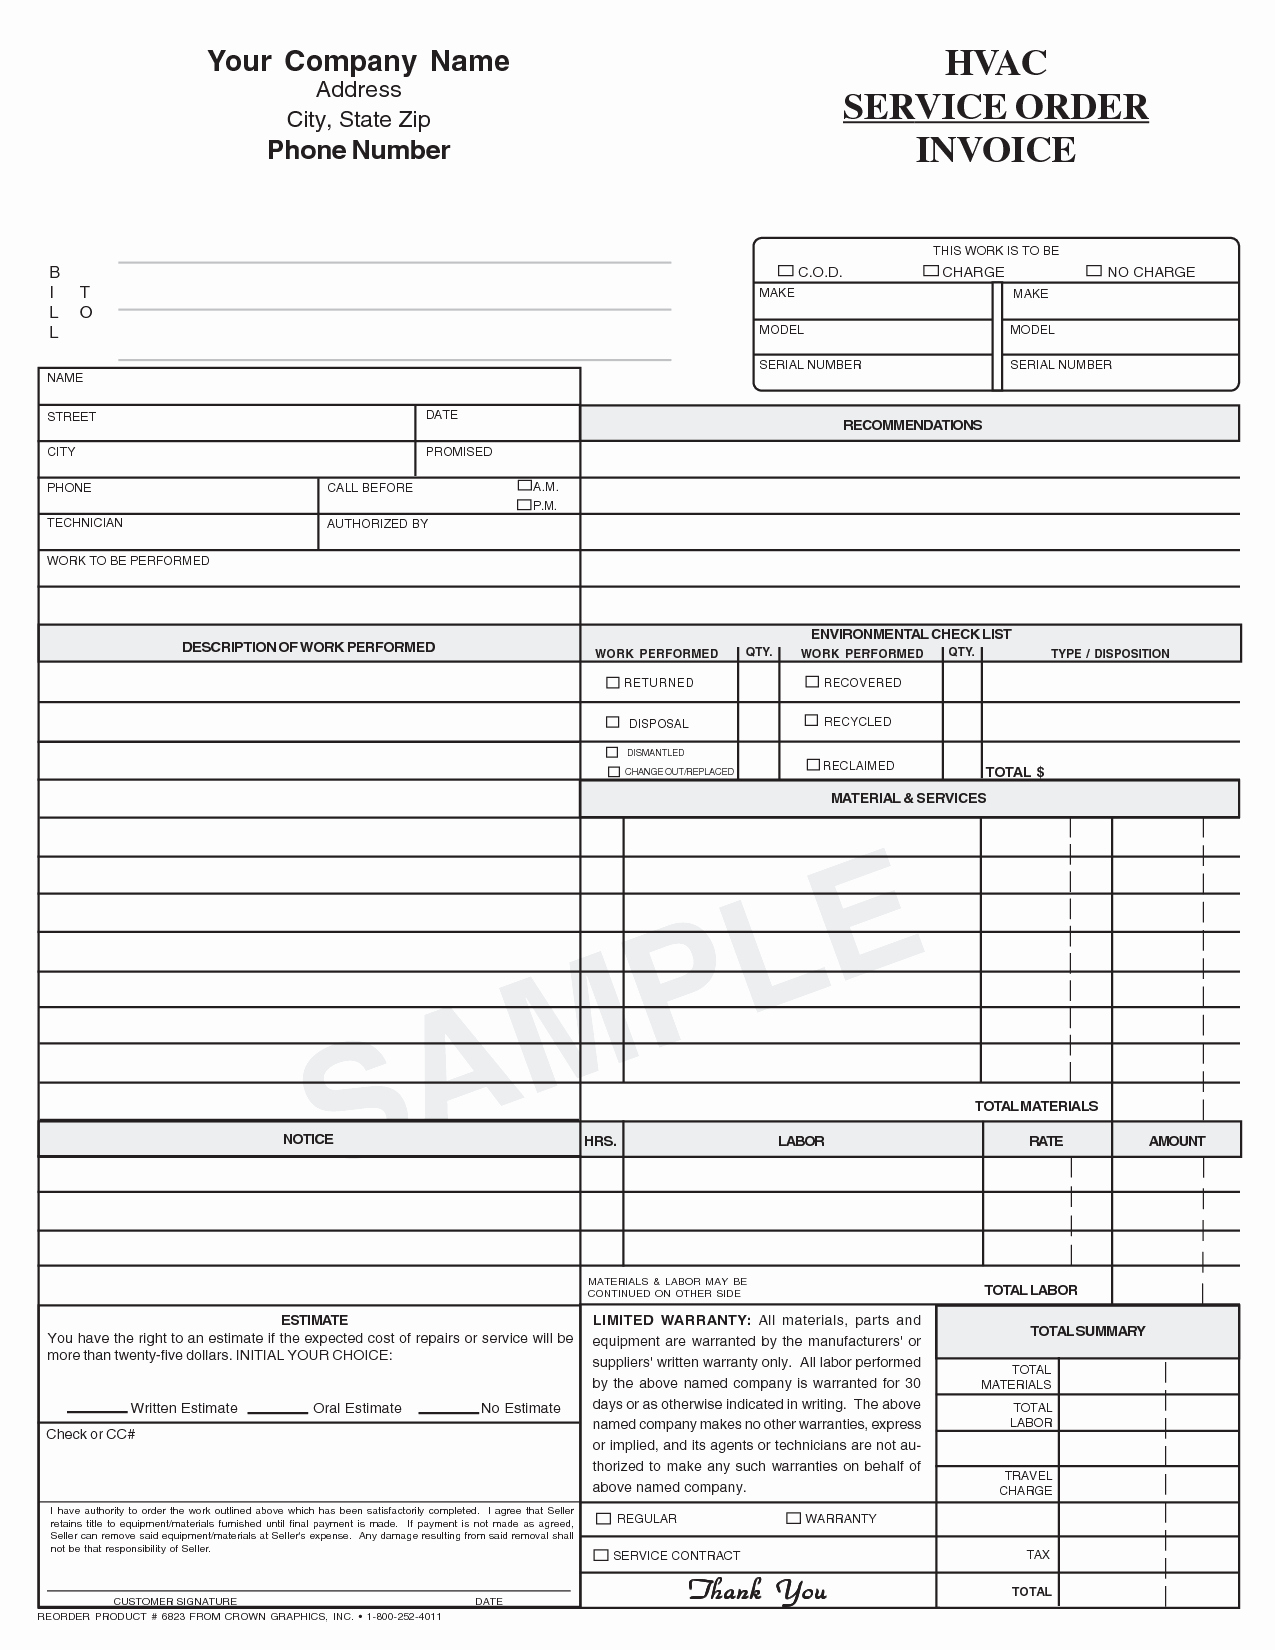 Free Hvac Invoice Template Inspirational Air Conditioning Service Report Template